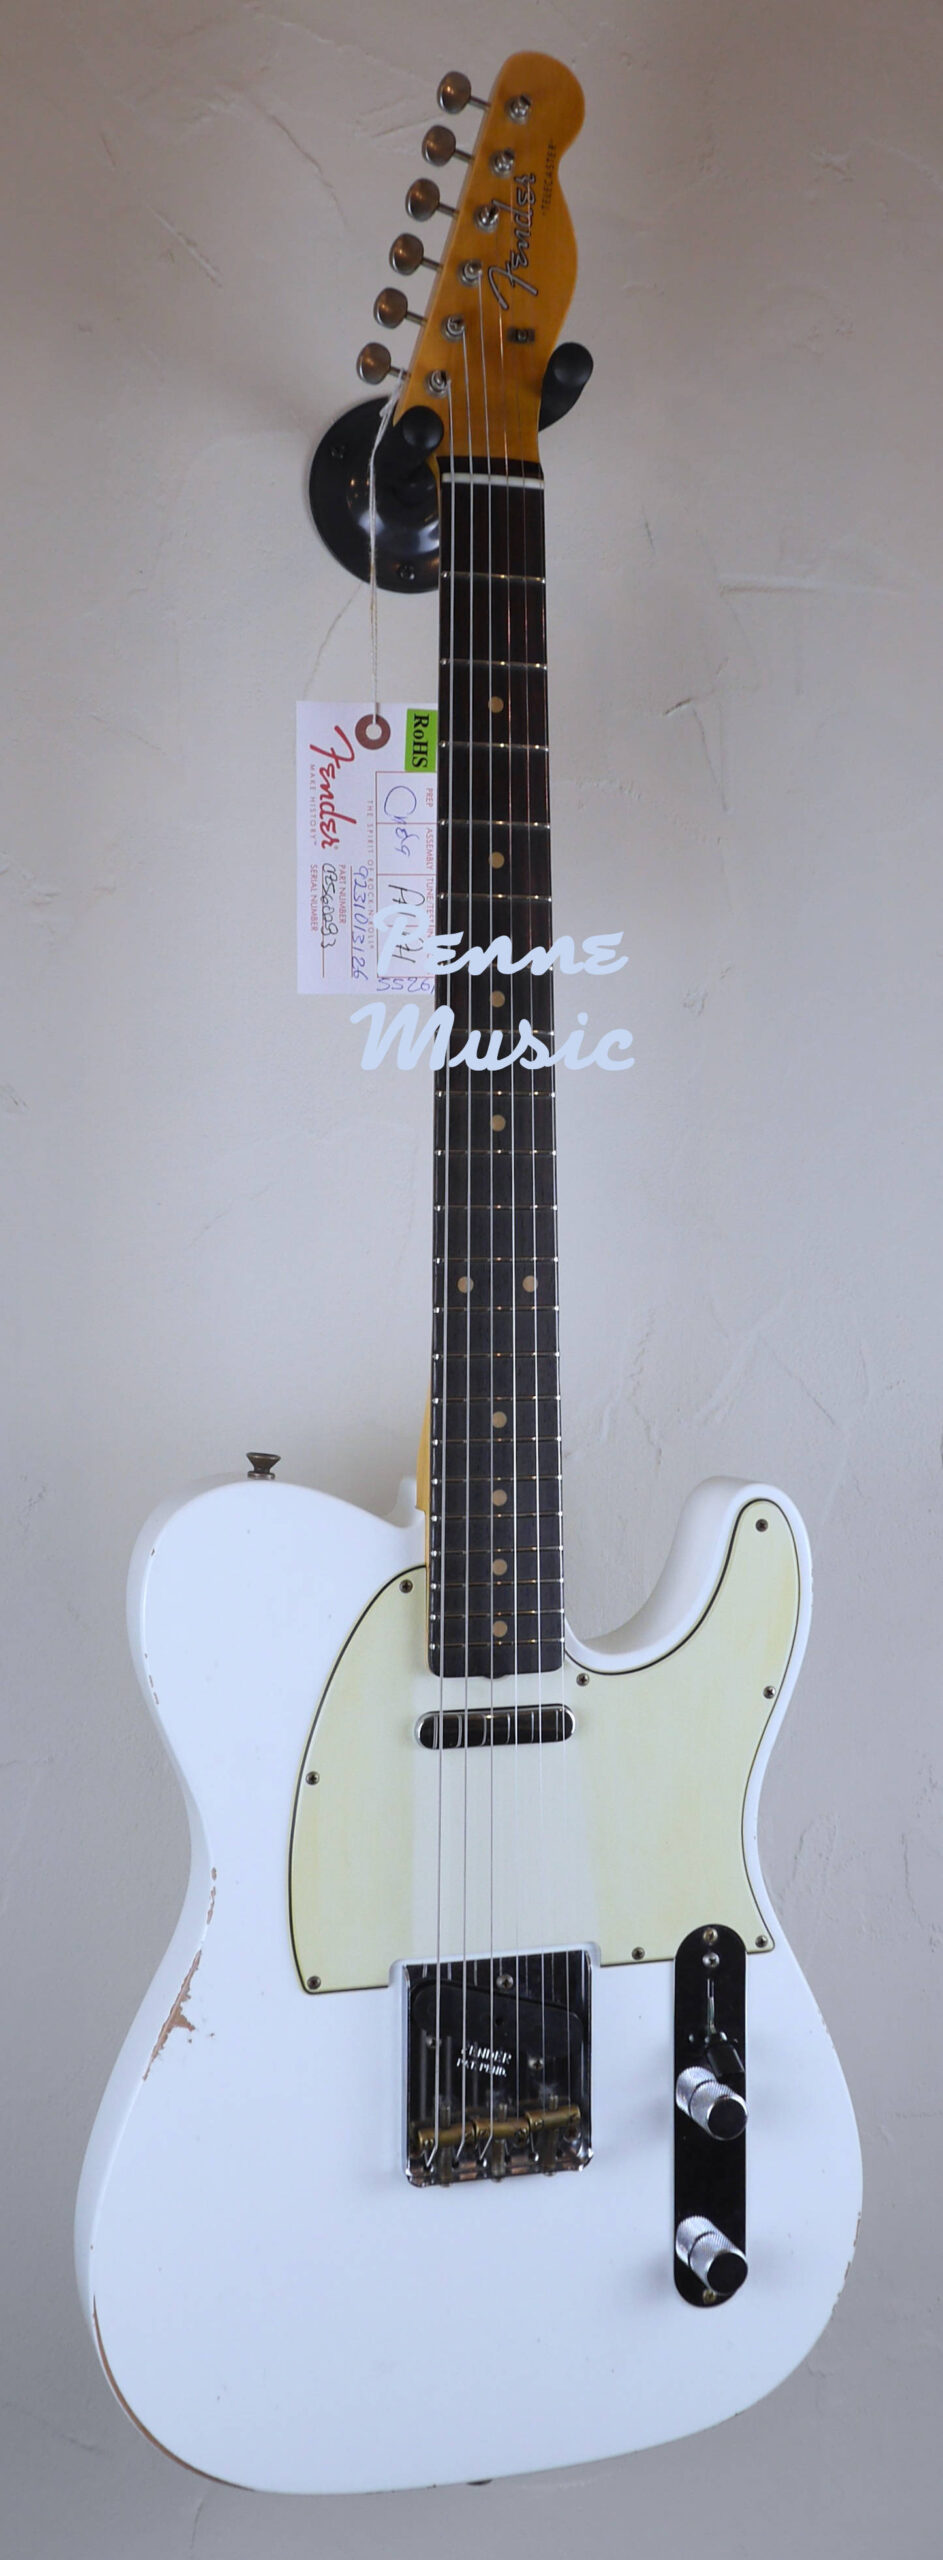 Fender Custom Shop Limited Edition 1961 Telecaster Aged Olympic White Relic 2